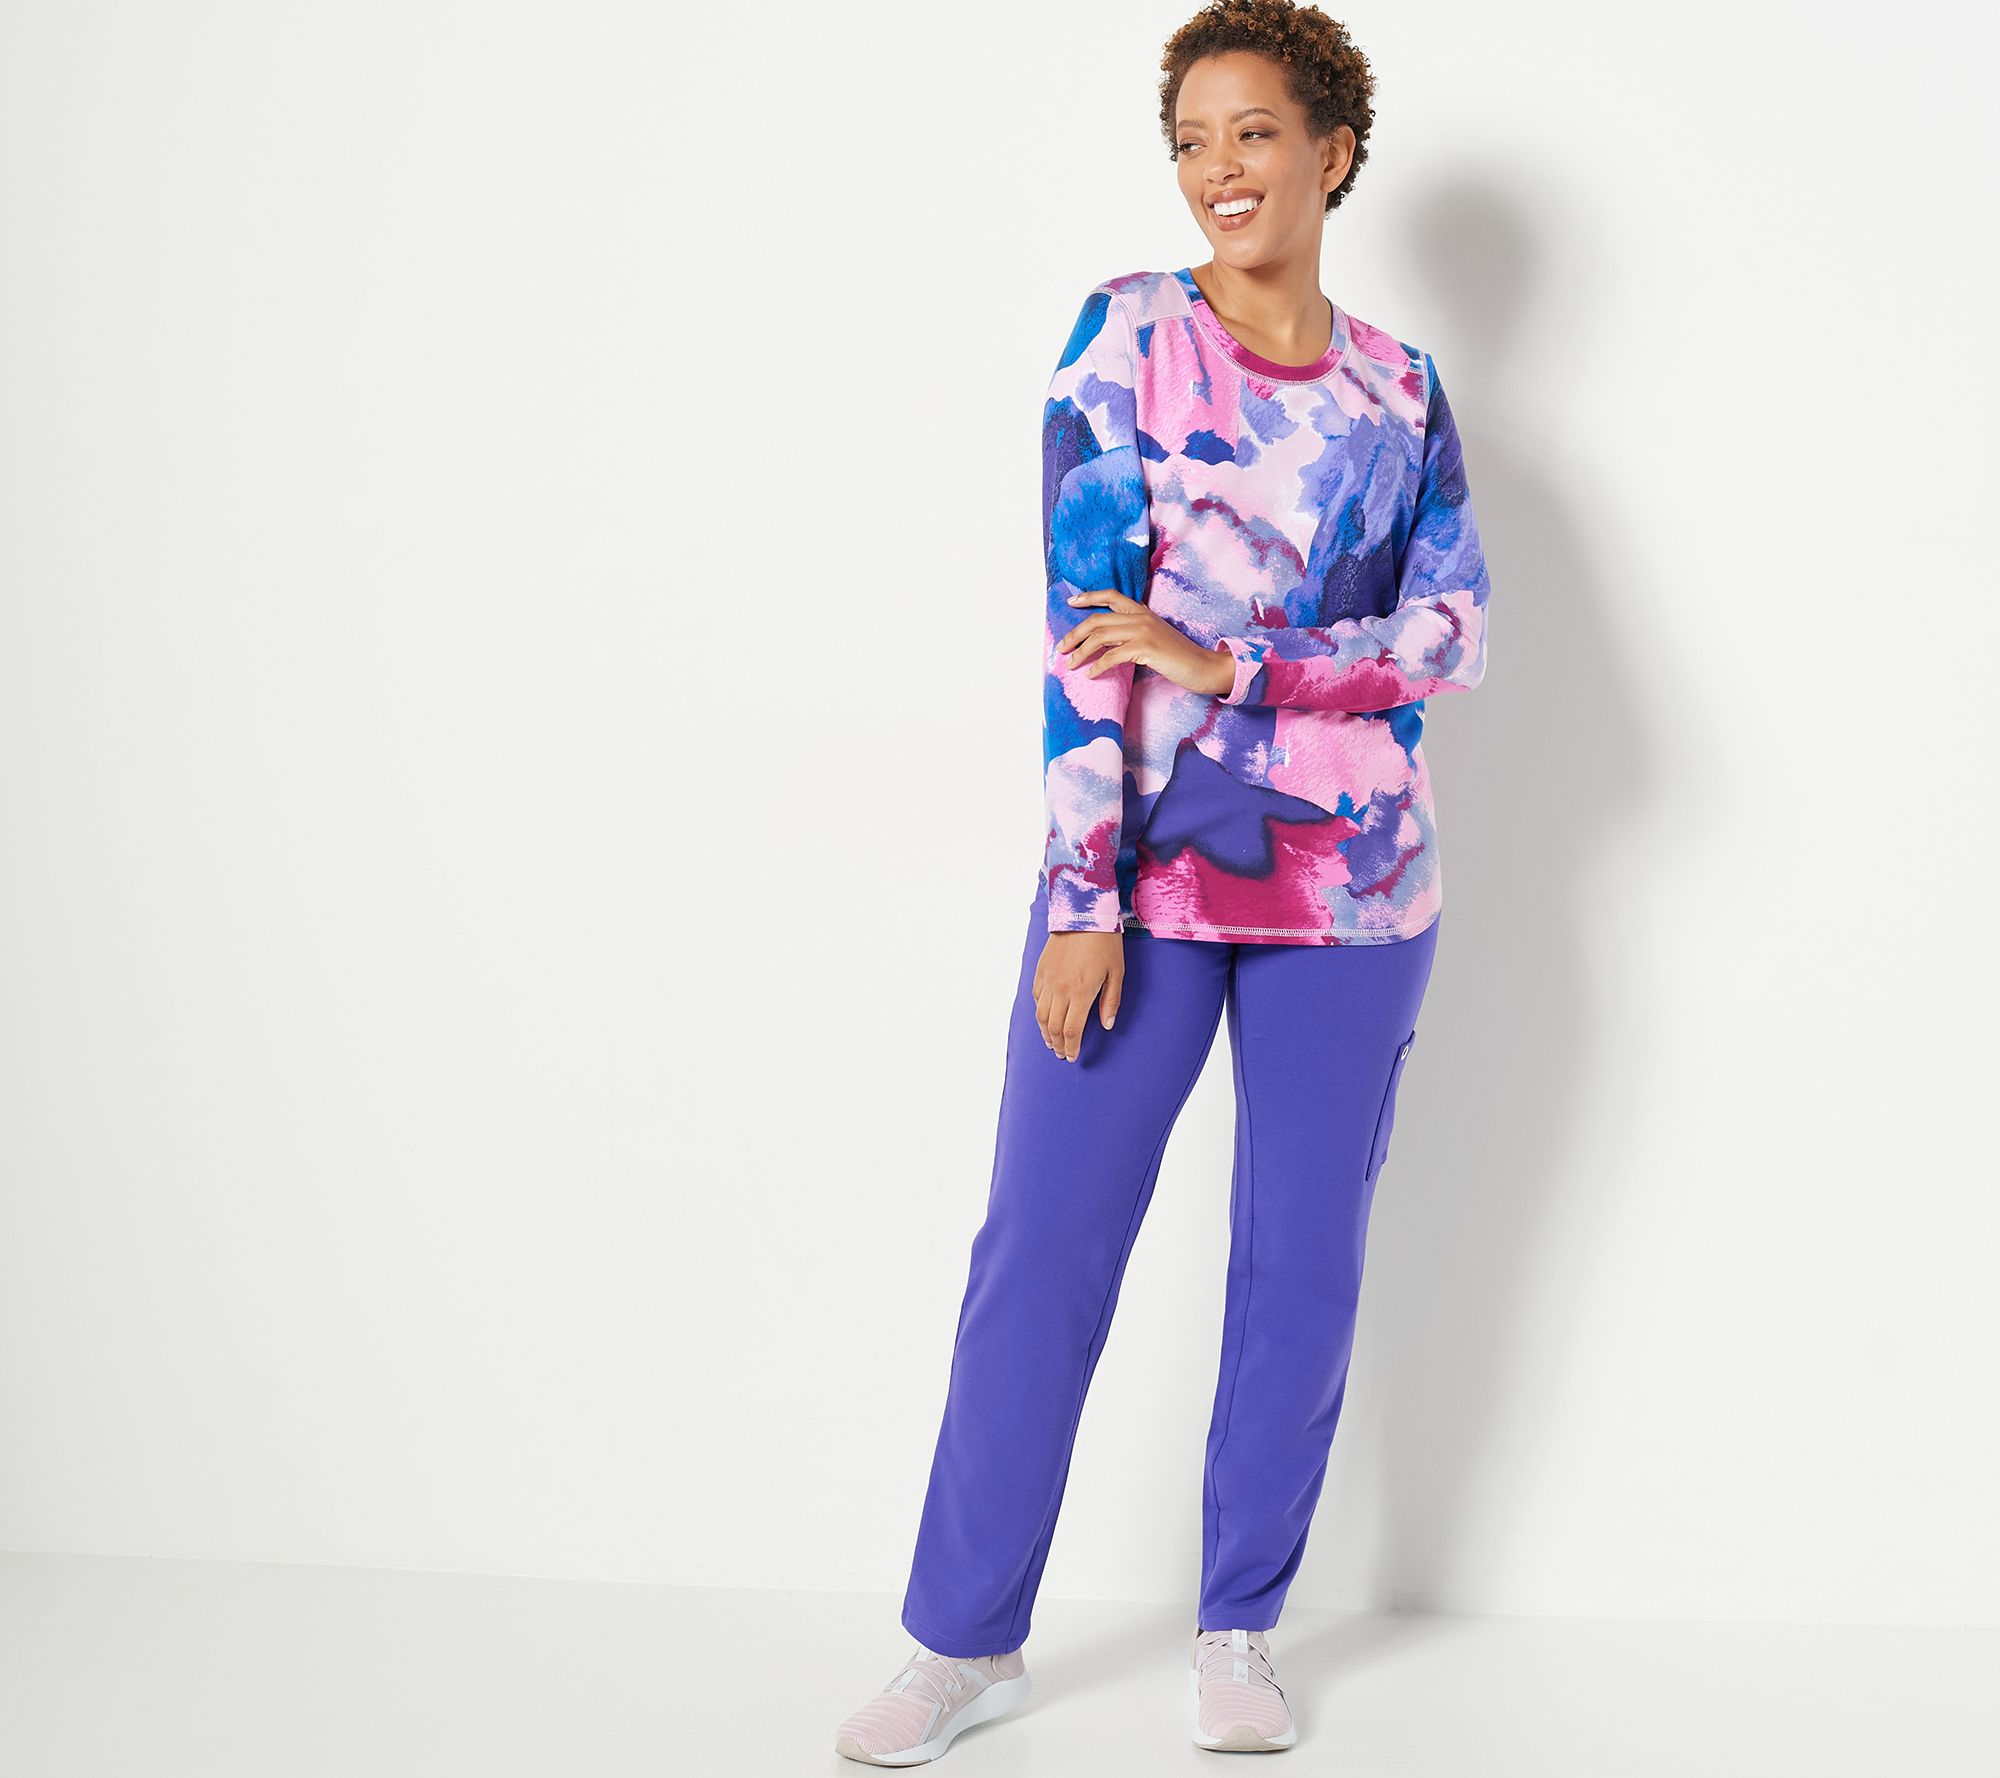 Sport Savvy French Terry Multi-Colored Top - QVC.com